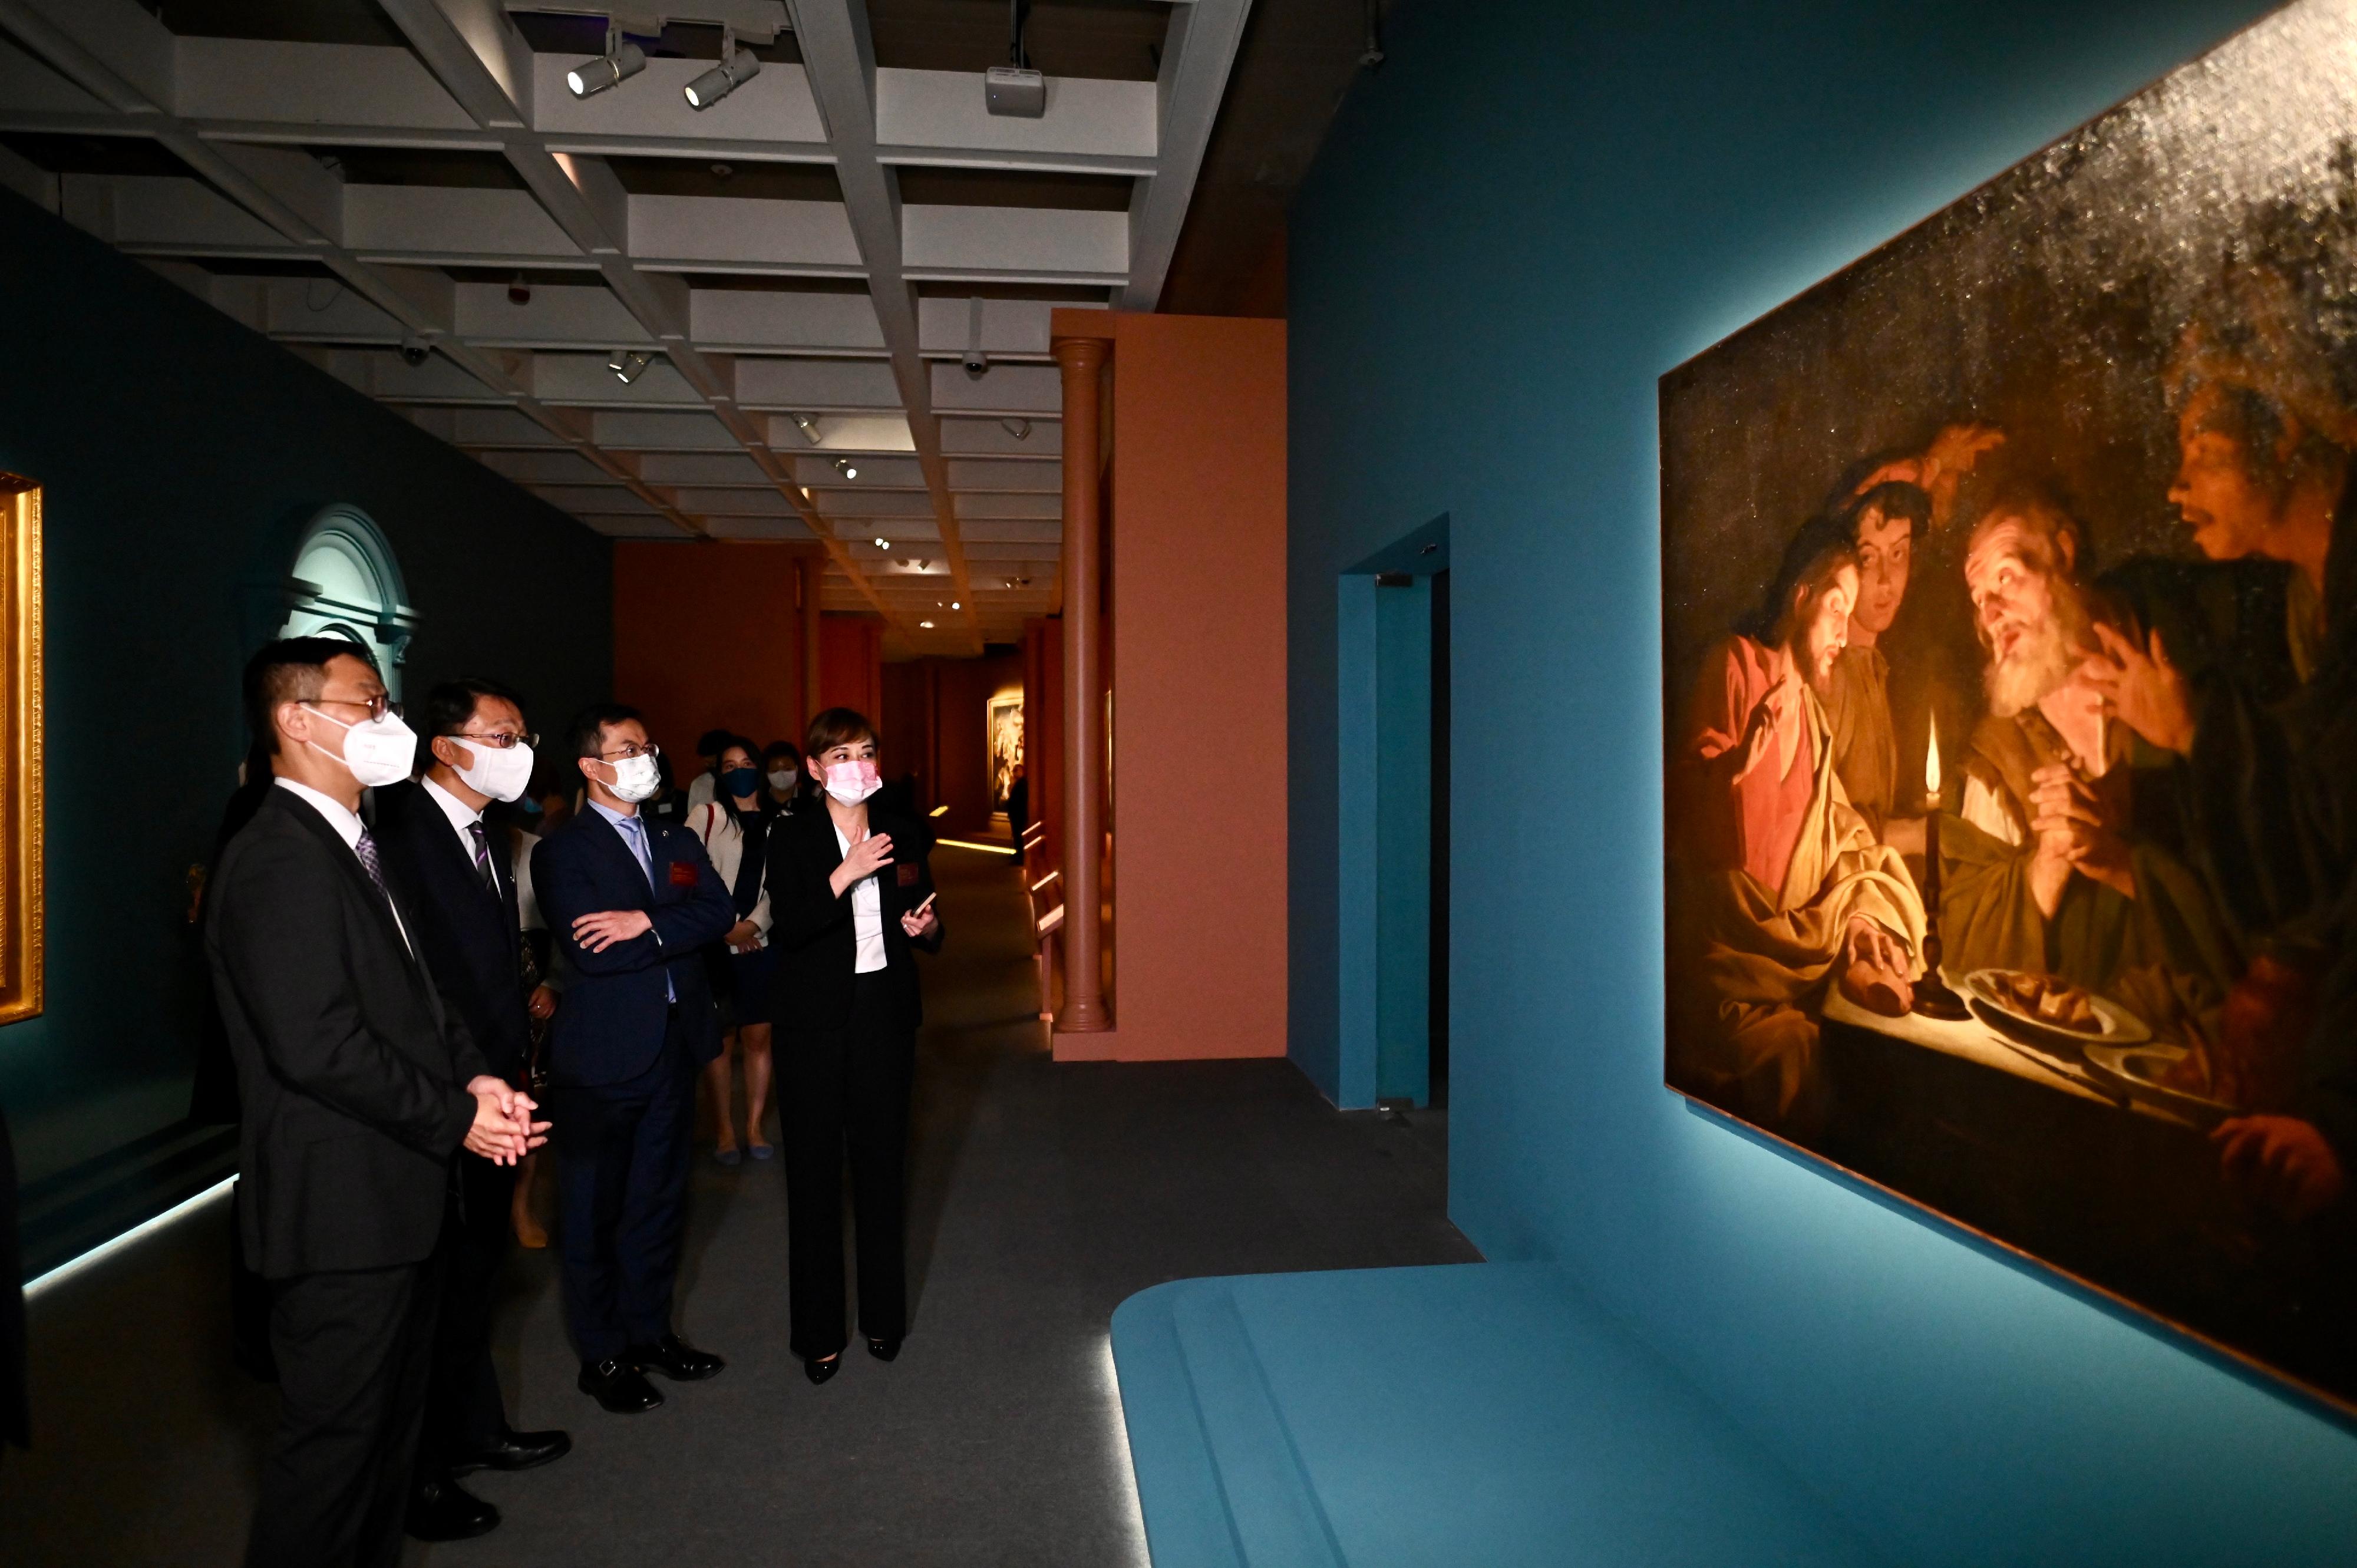 The opening ceremony for the exhibition, "The Hong Kong Jockey Club Series: The Road to the Baroque - Masterpieces from the Capodimonte Museum", was held today (July 14) at the Hong Kong Museum of Art. Picture shows officiating guests (from left) the Secretary for Culture, Sports and Tourism, Mr Kevin Yeung; the Director of Leisure and Cultural Services, Mr Vincent Liu; the Executive Director of Charities and Community of the Hong Kong Jockey Club, Mr Leong Cheung; and the Museum Director of the HKMoA, Dr Maria Mok touring the exhibition.